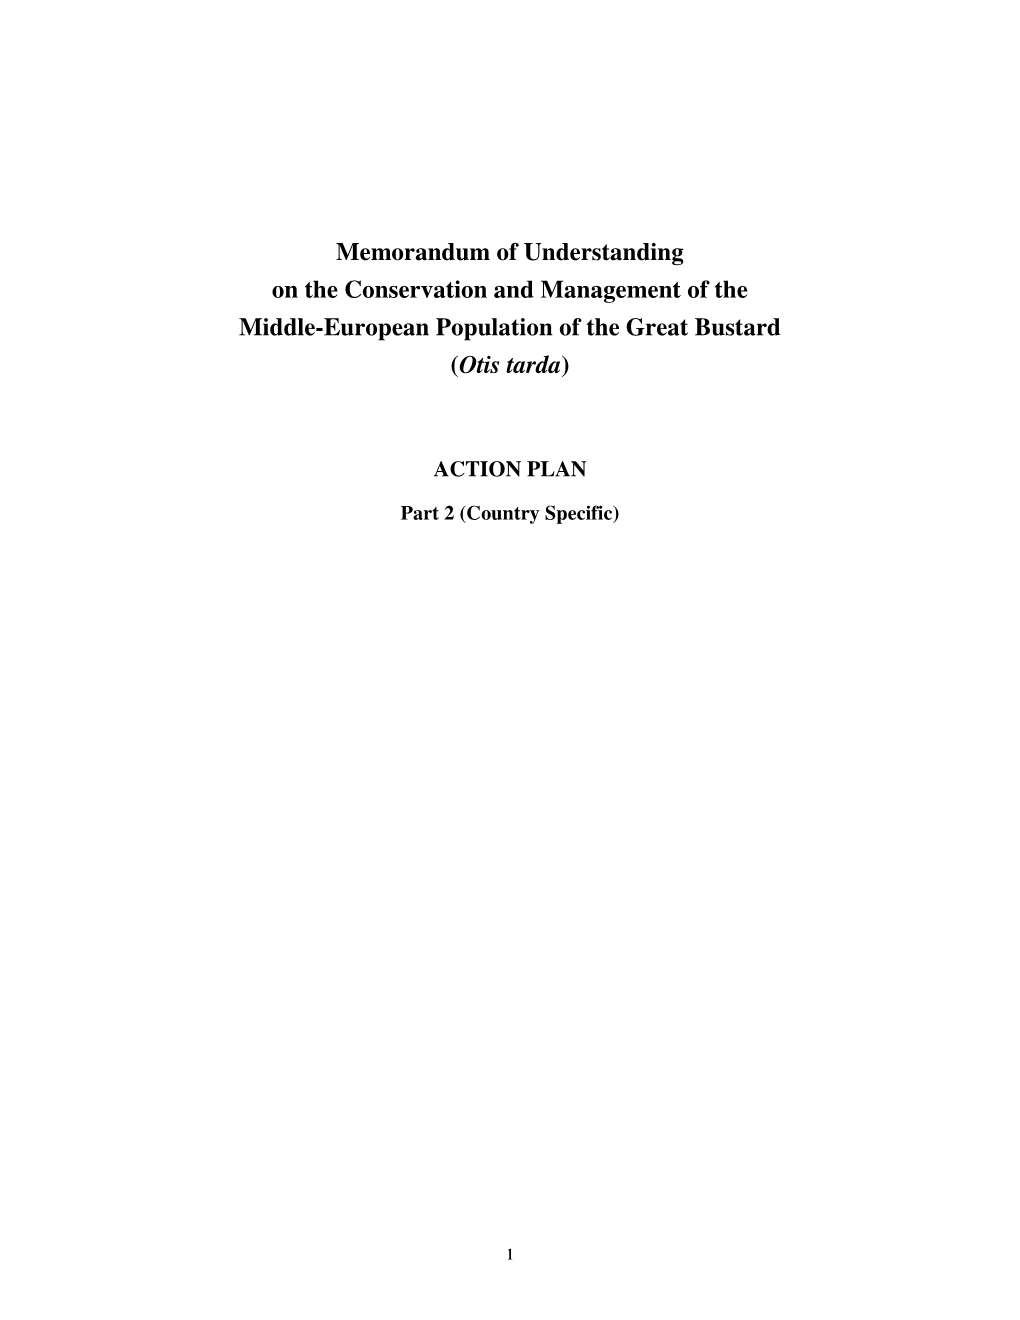 Memorandum of Understanding on the Conservation and Management of the Middle-European Population of the Great Bustard (Otis Tarda )